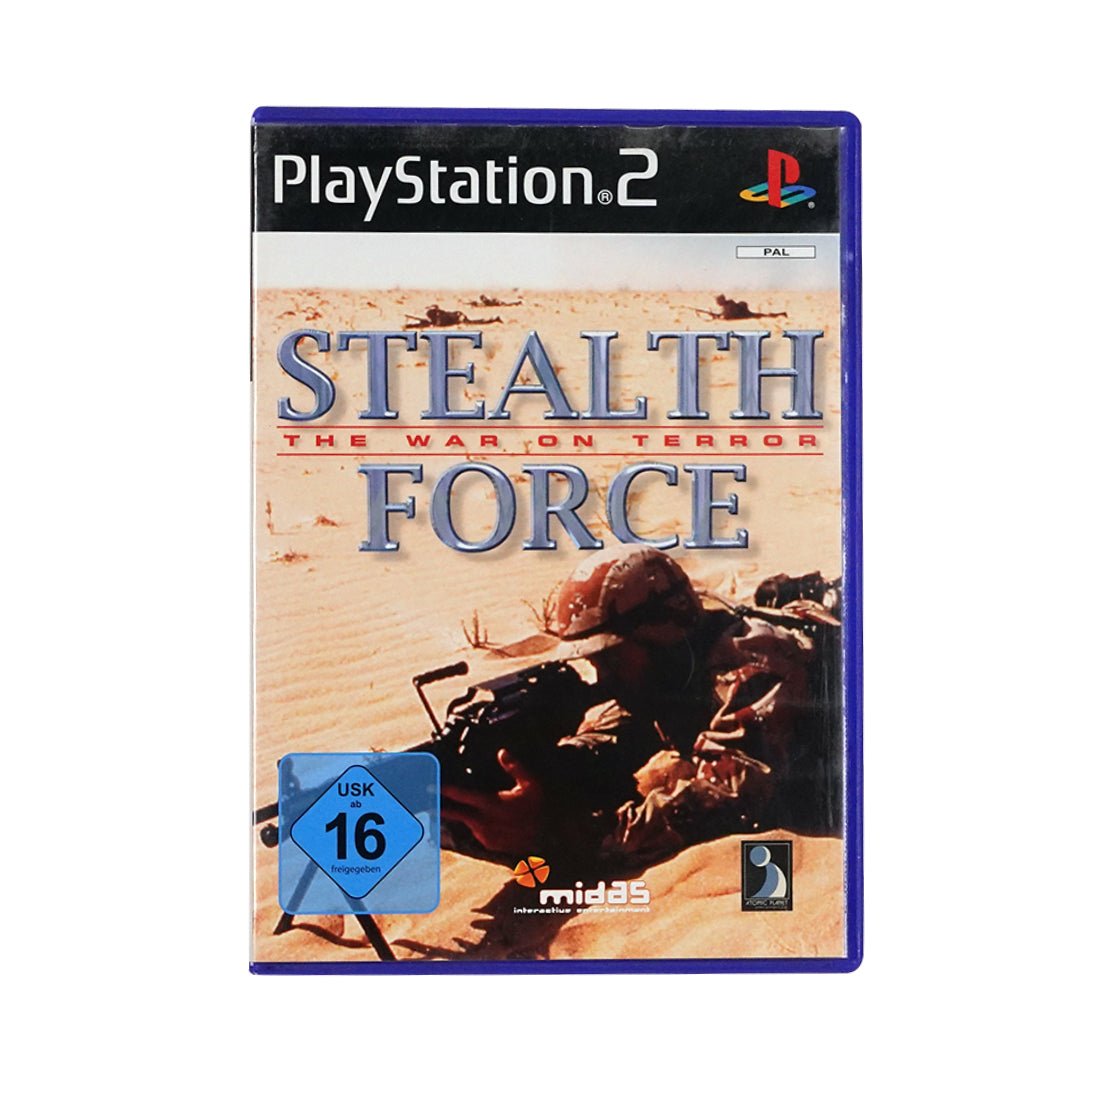 (Pre-Owned) Stealth Force: The war on Terror - PlayStation 2 - Store 974 | ستور ٩٧٤